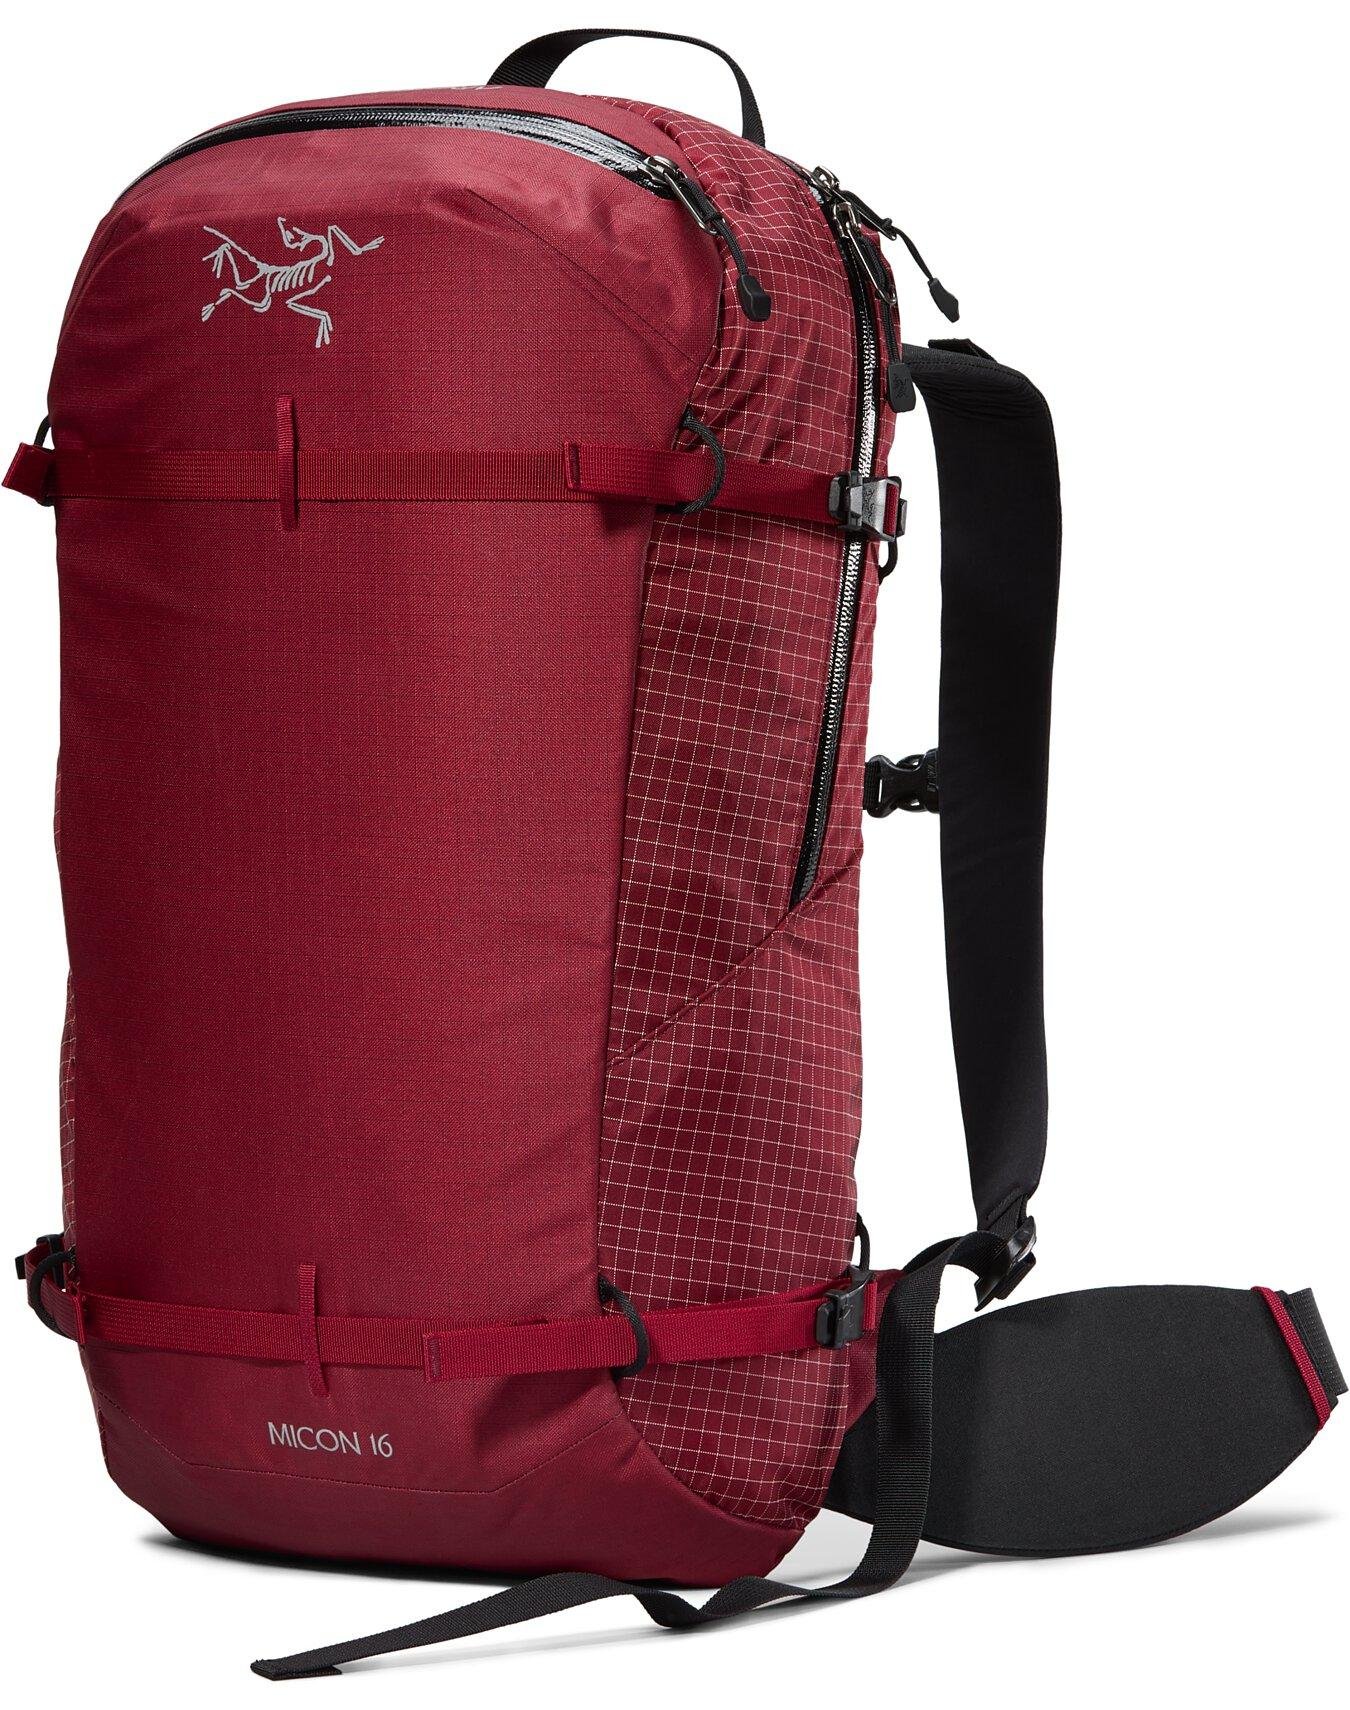 Micon 16 Backpack by ARC'TERYX